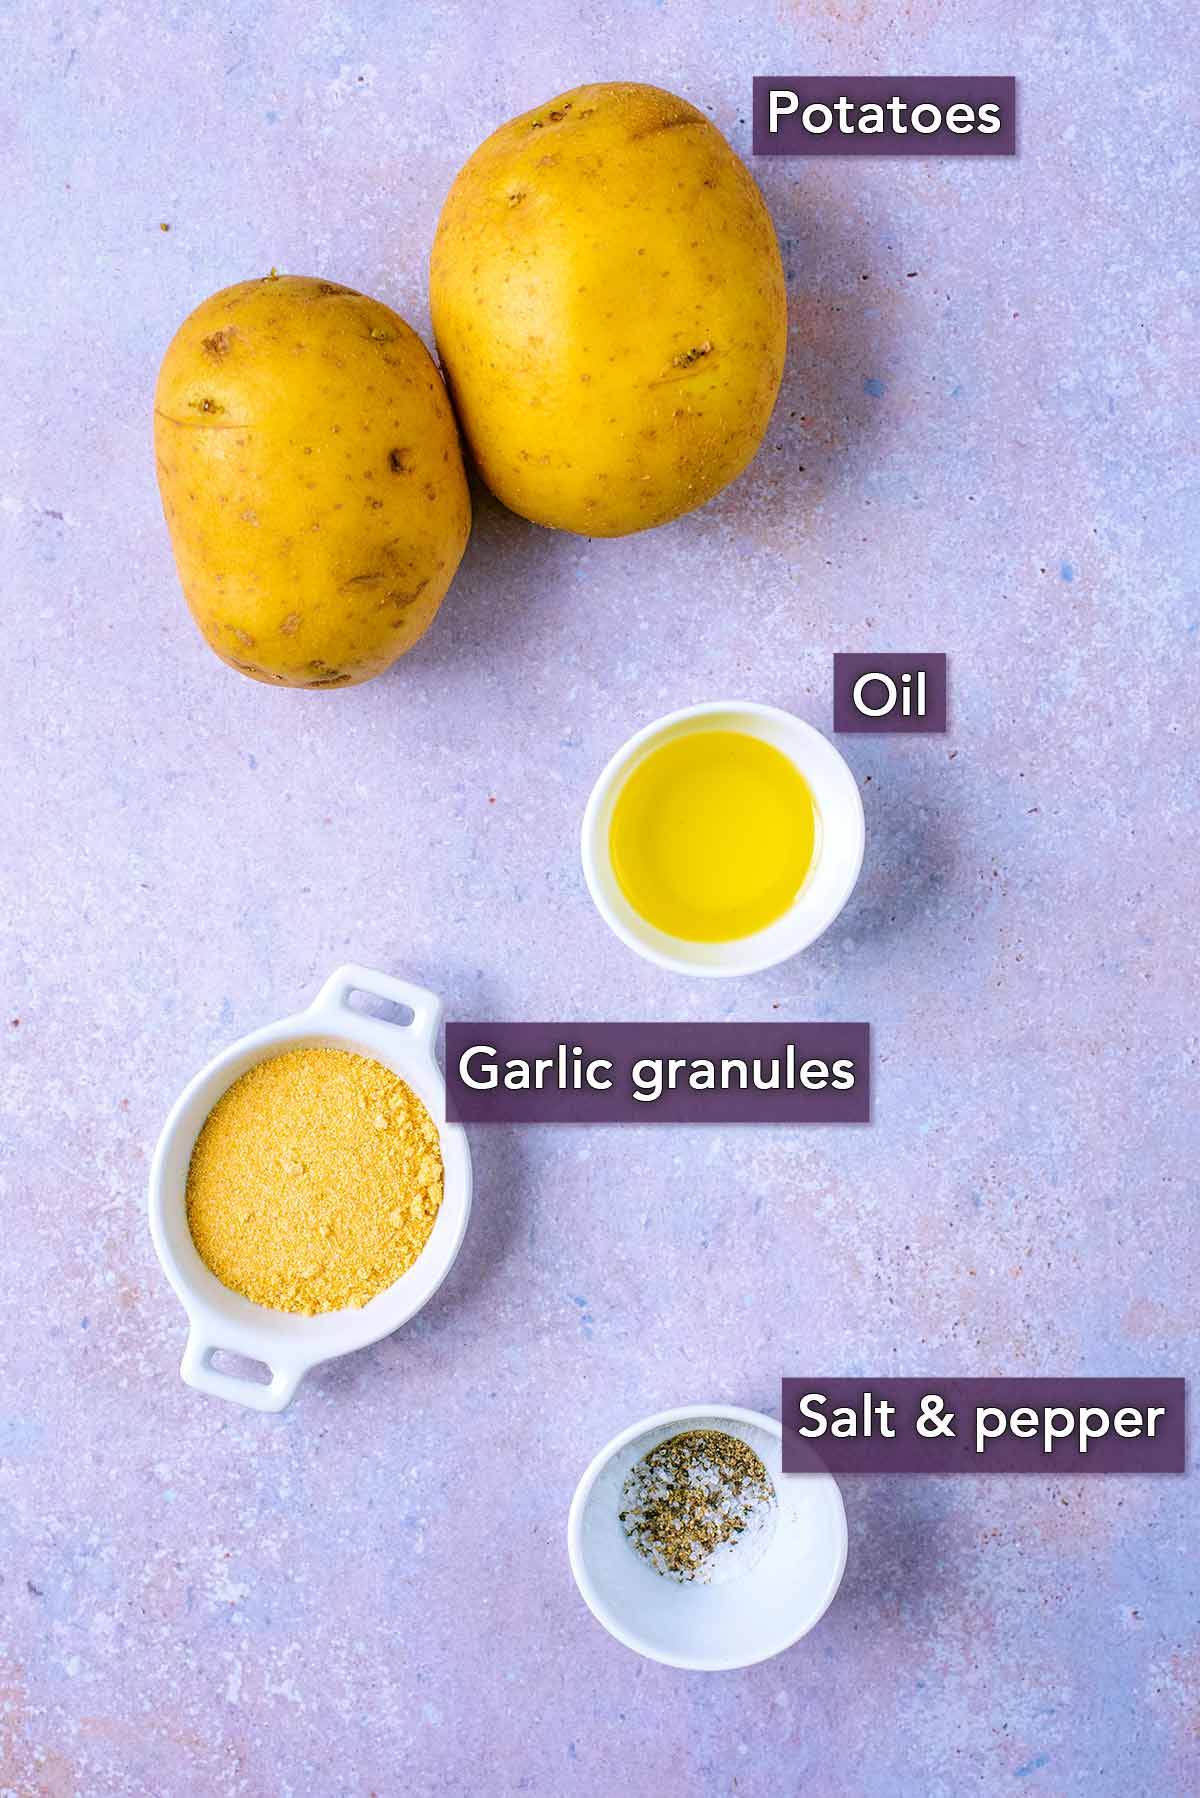 The ingredients needed to make air fryer chips with text overlay labels.